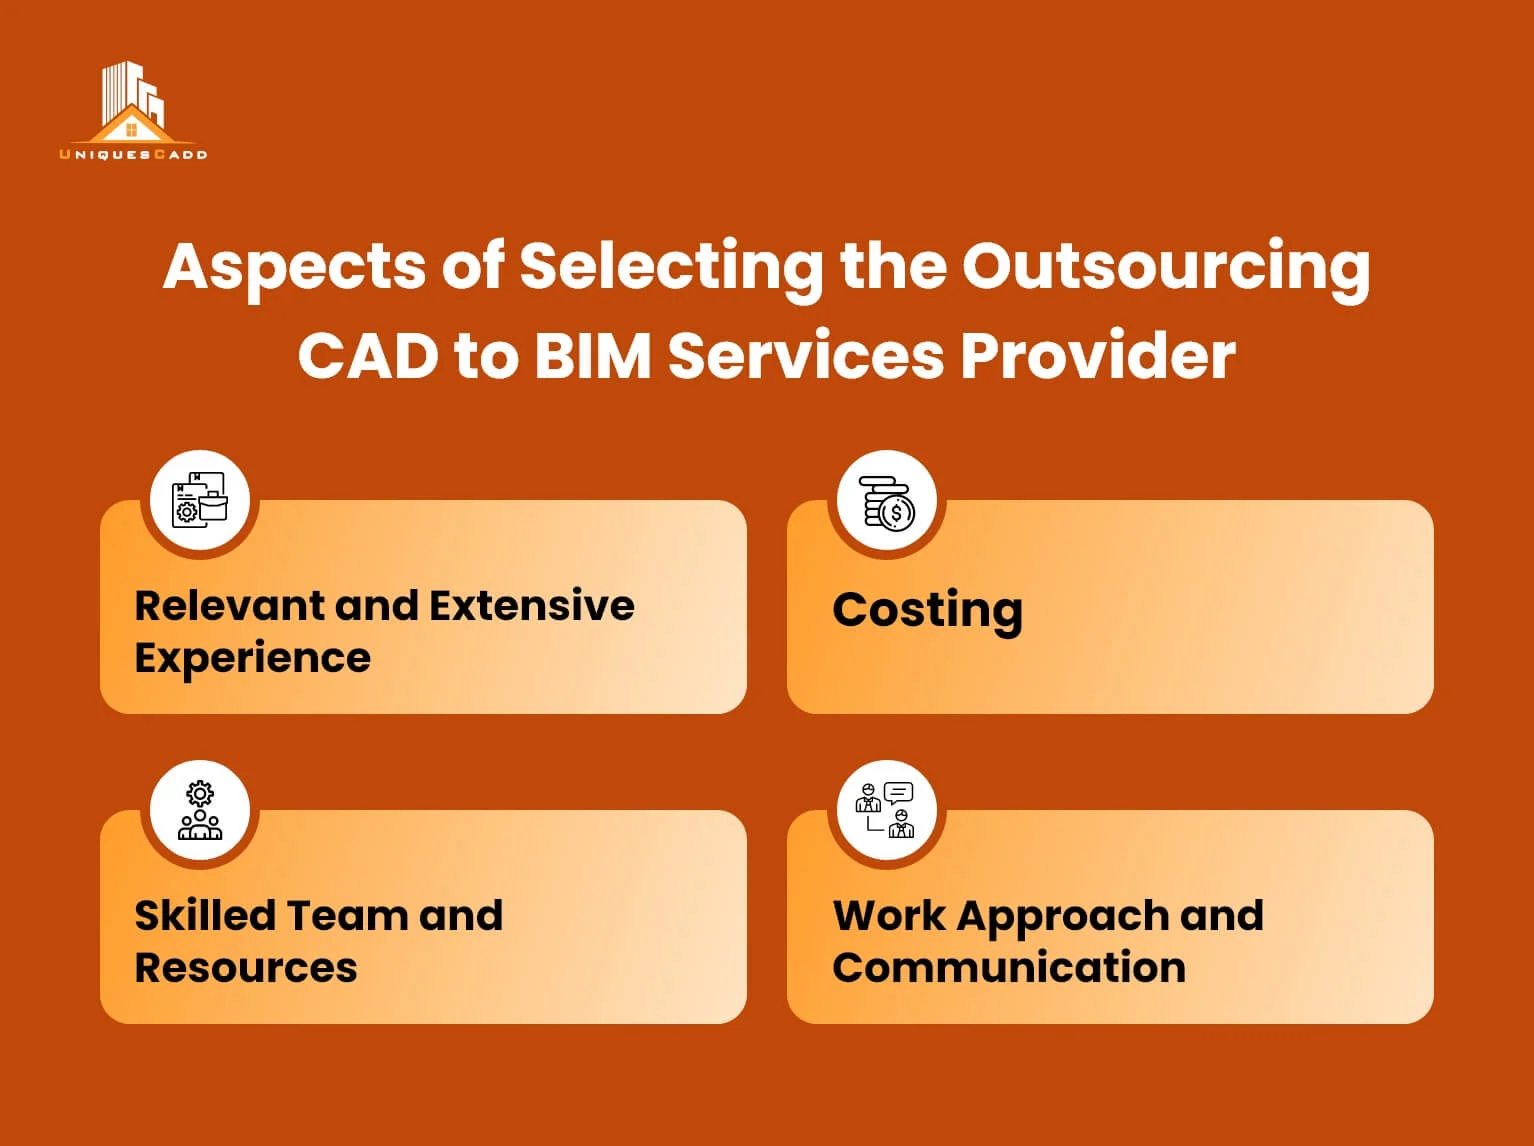 Aspects of Selecting the Outsourcing CAD to BIM Services Provider